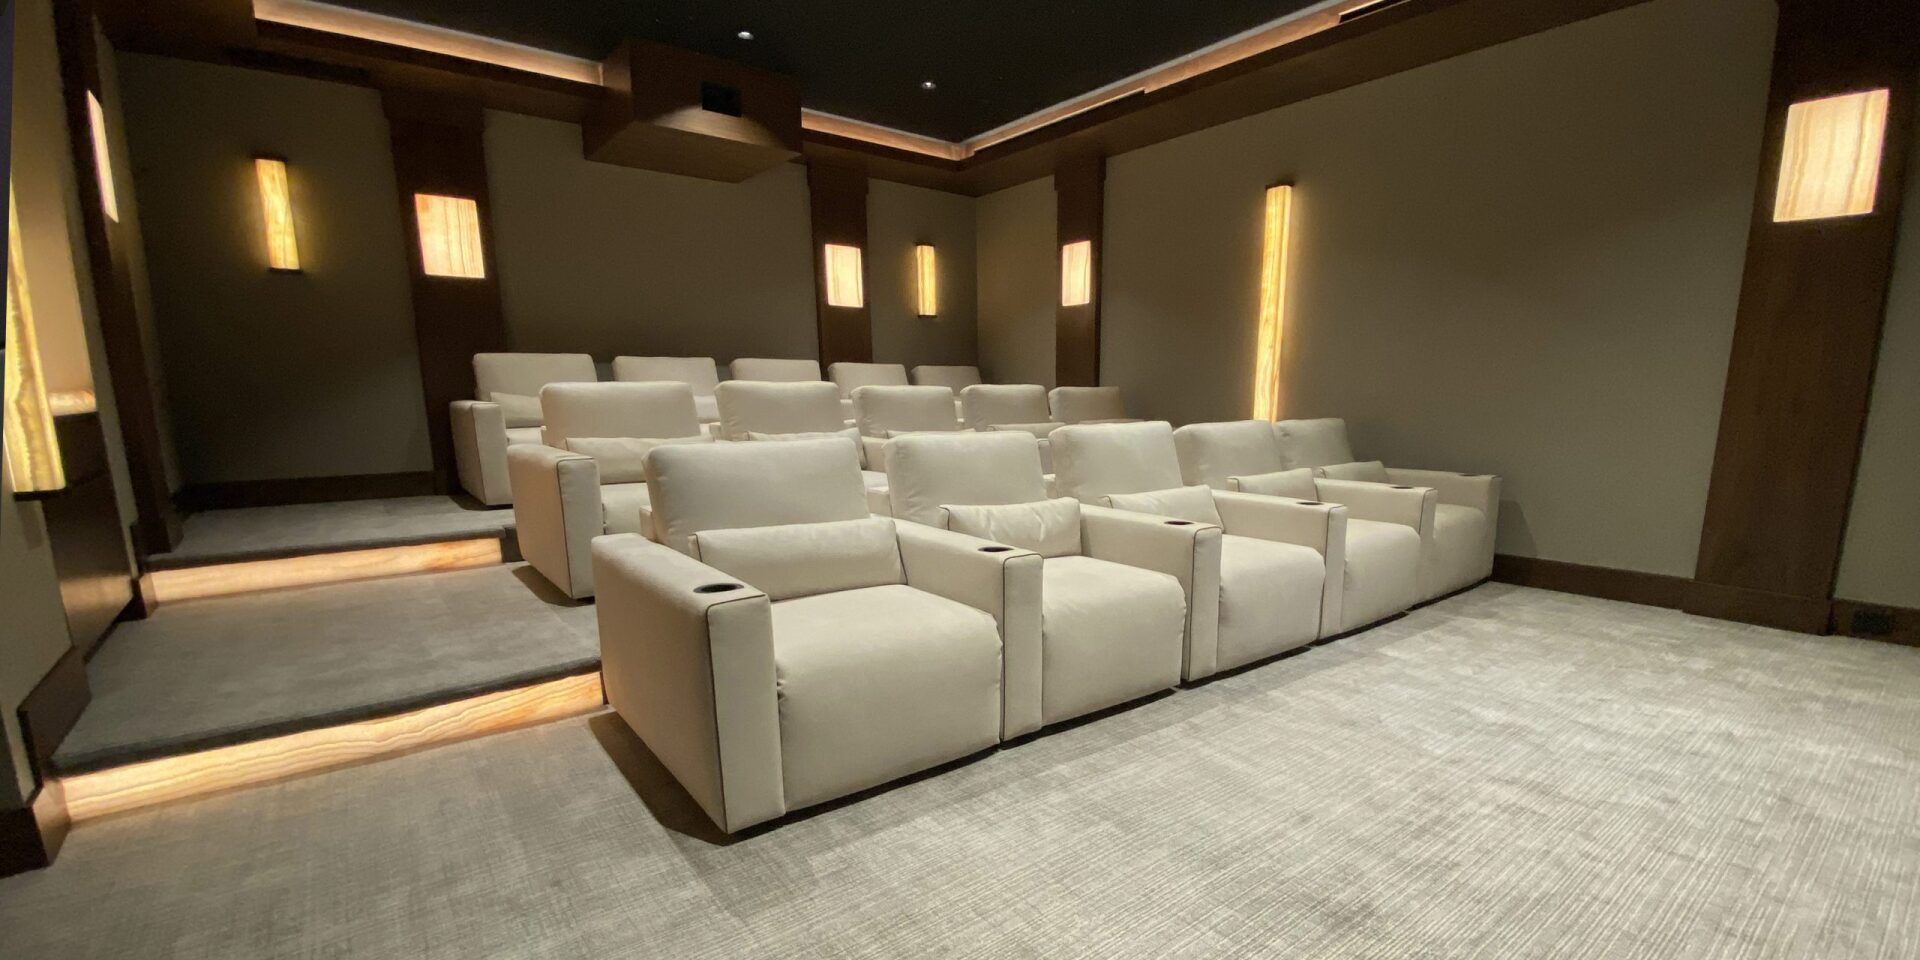 A home theater with white chairs and a projector.